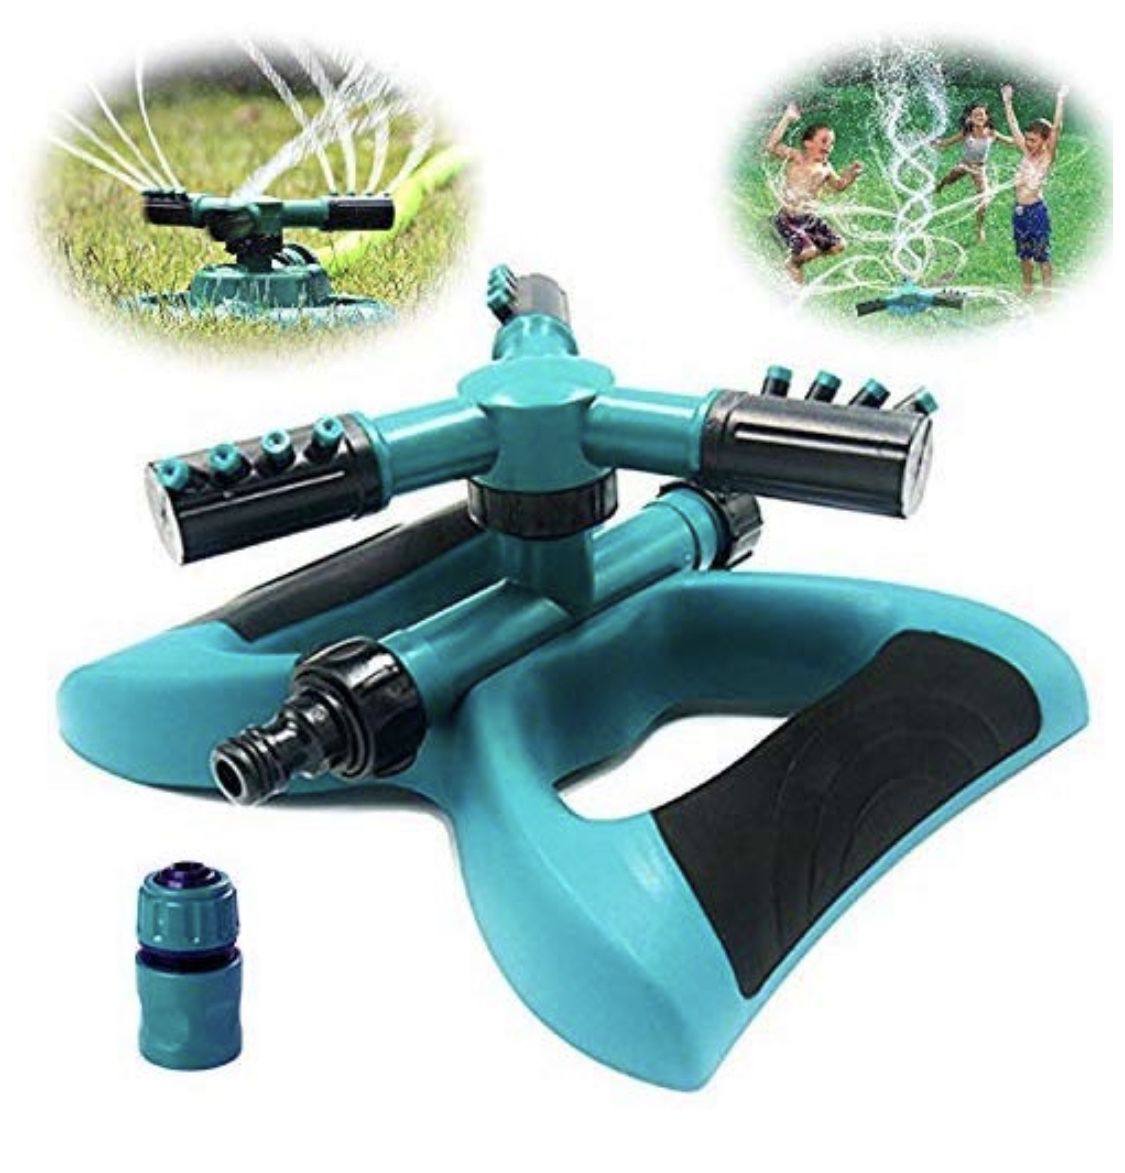 6-005 Lawn Sprinkler - Automatic 360 Rotating Adjustable Garden Hose Watering Sprinkler Head for Kids, with 3600 SQ FT Coverage Yard Irrigation Syste